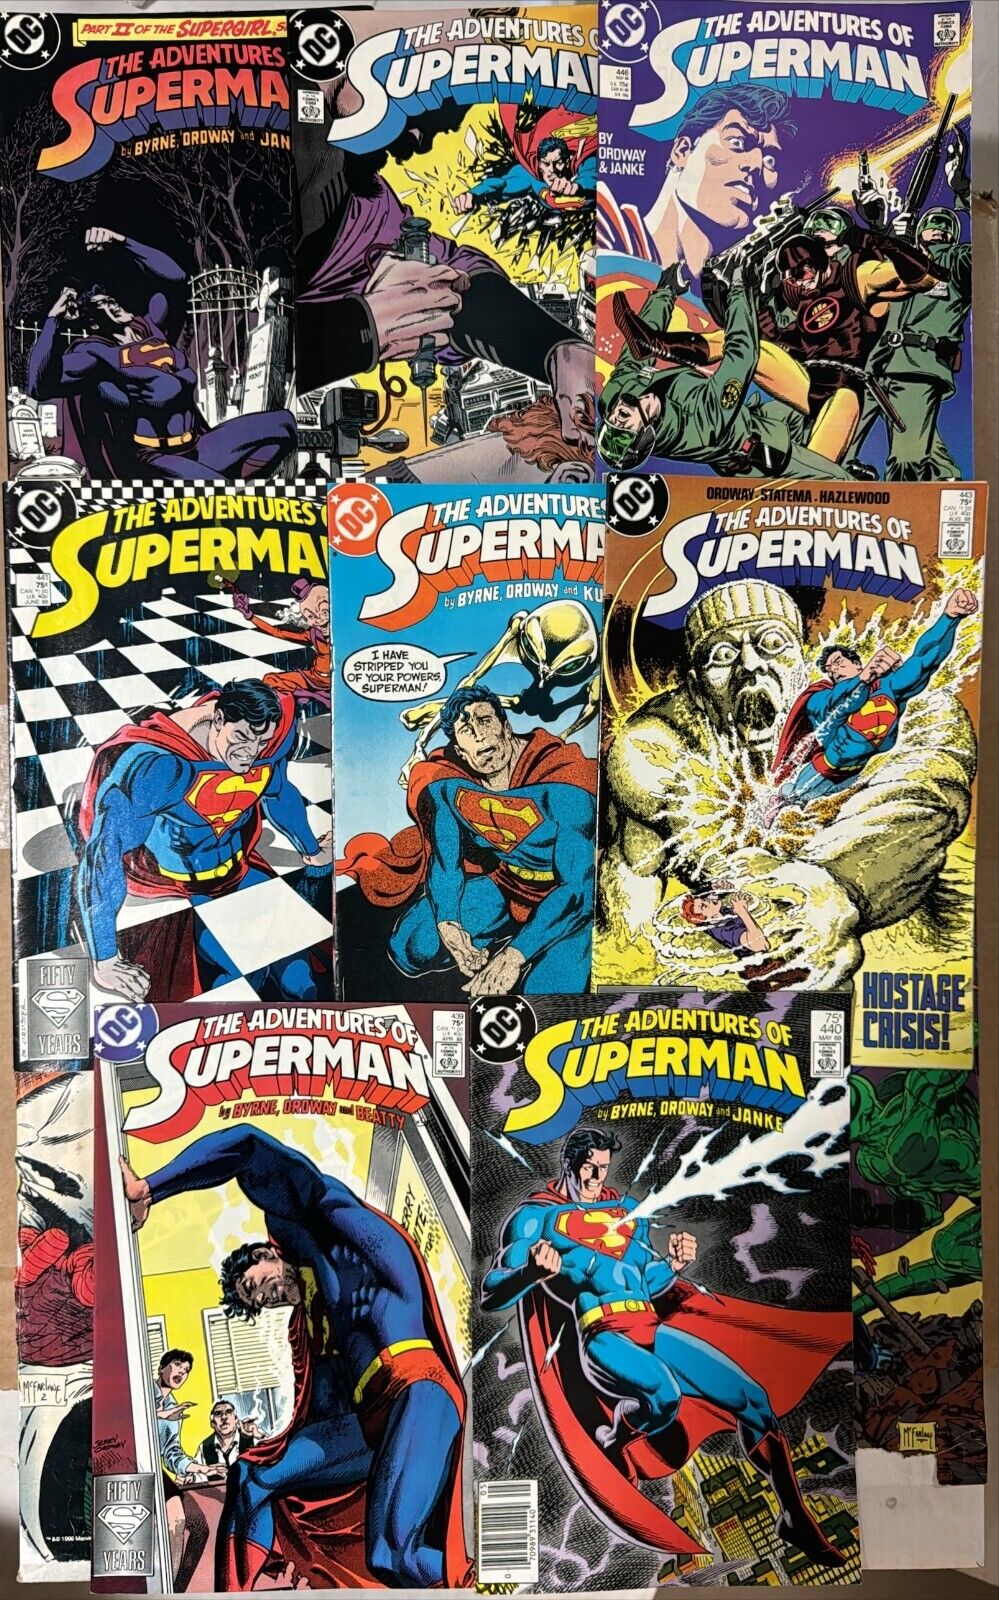 The Adventures Of Superman #439, 440, 441, 442, 443, 444, 445, 446 1988 Lot of 8